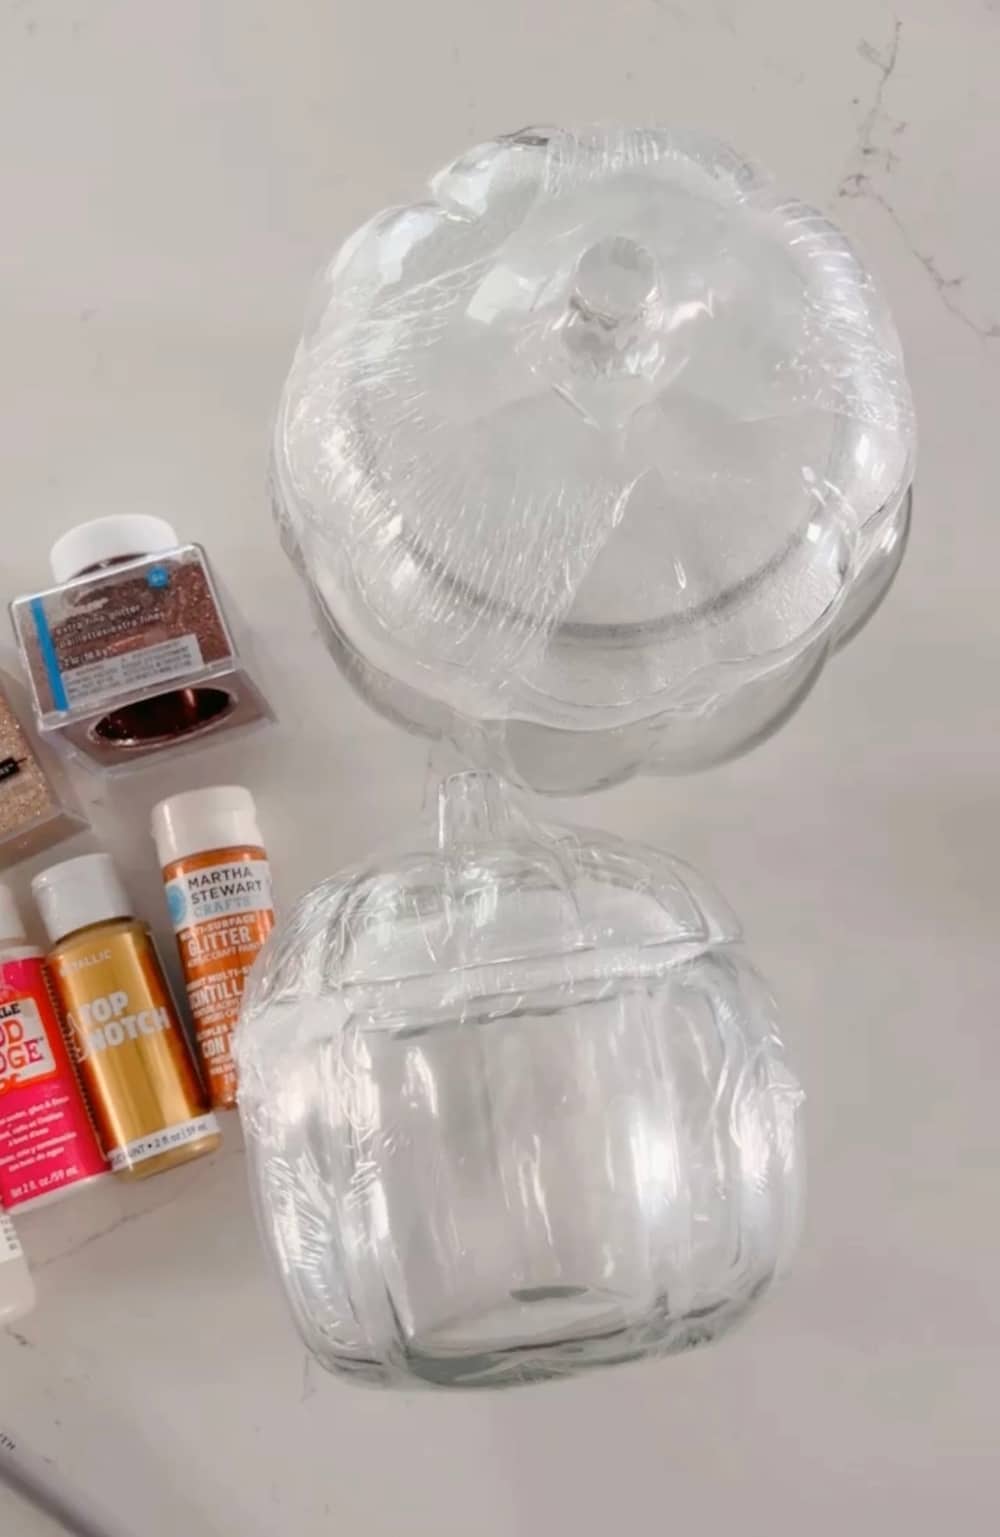 Pottery Barn Inspired Amber Pumpkin Cloches. Turn inexpensive glass pumpkin containers into high end looking cloches by painting and adding glitter! 